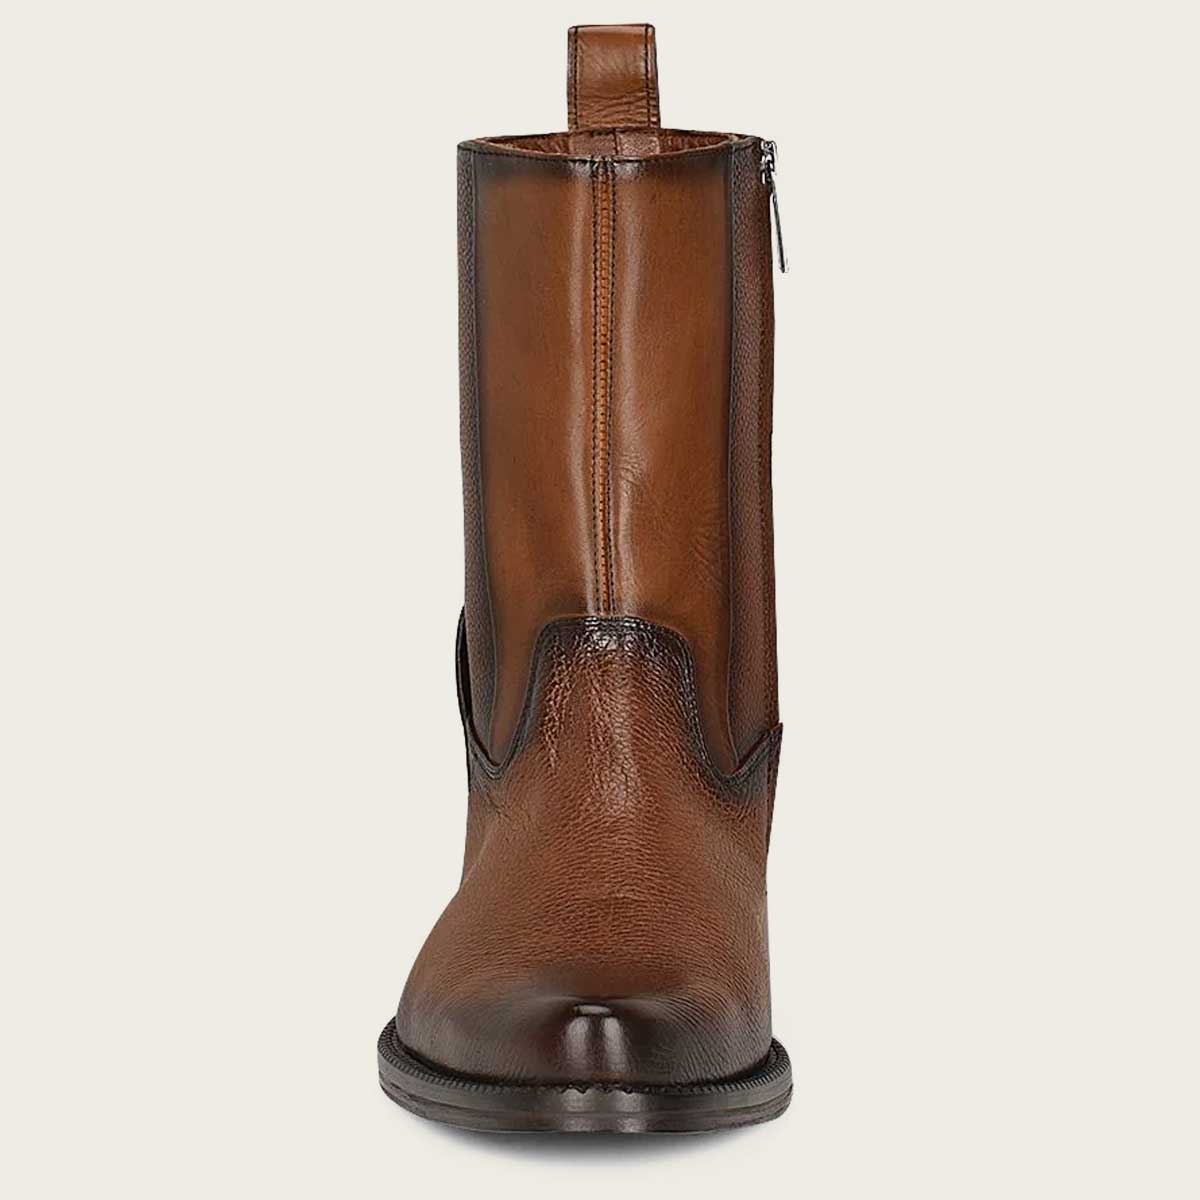 Make a statement with our hand-painted honey deer leather boots - perfect for adding a touch of elegance to any outfit.